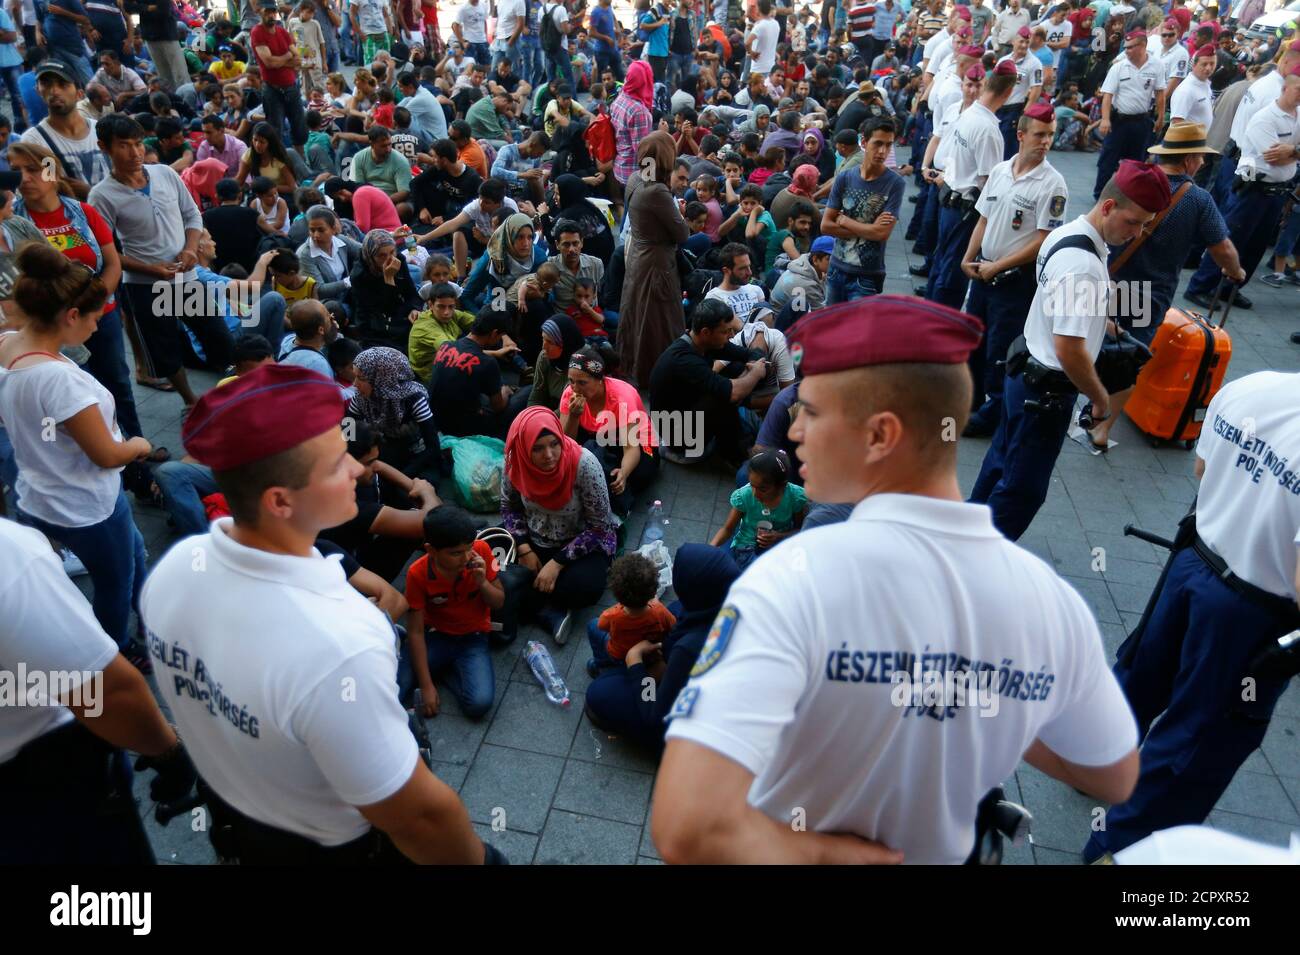 Hungarian police officers watch migrants outside the main Eastern Railway station in Budapest, Hungary, September 1, 2015. Hungary closed Budapest's main Eastern Railway station on Tuesday morning with no trains departing or arriving until further notice, a spokesman for state railway company MAV said. There are hundreds of migrants waiting at the station. People have been told to leave the station and police have lined up at the main entrance, national news agency MTI reported. REUTERS/Laszlo Balogh Stock Photo